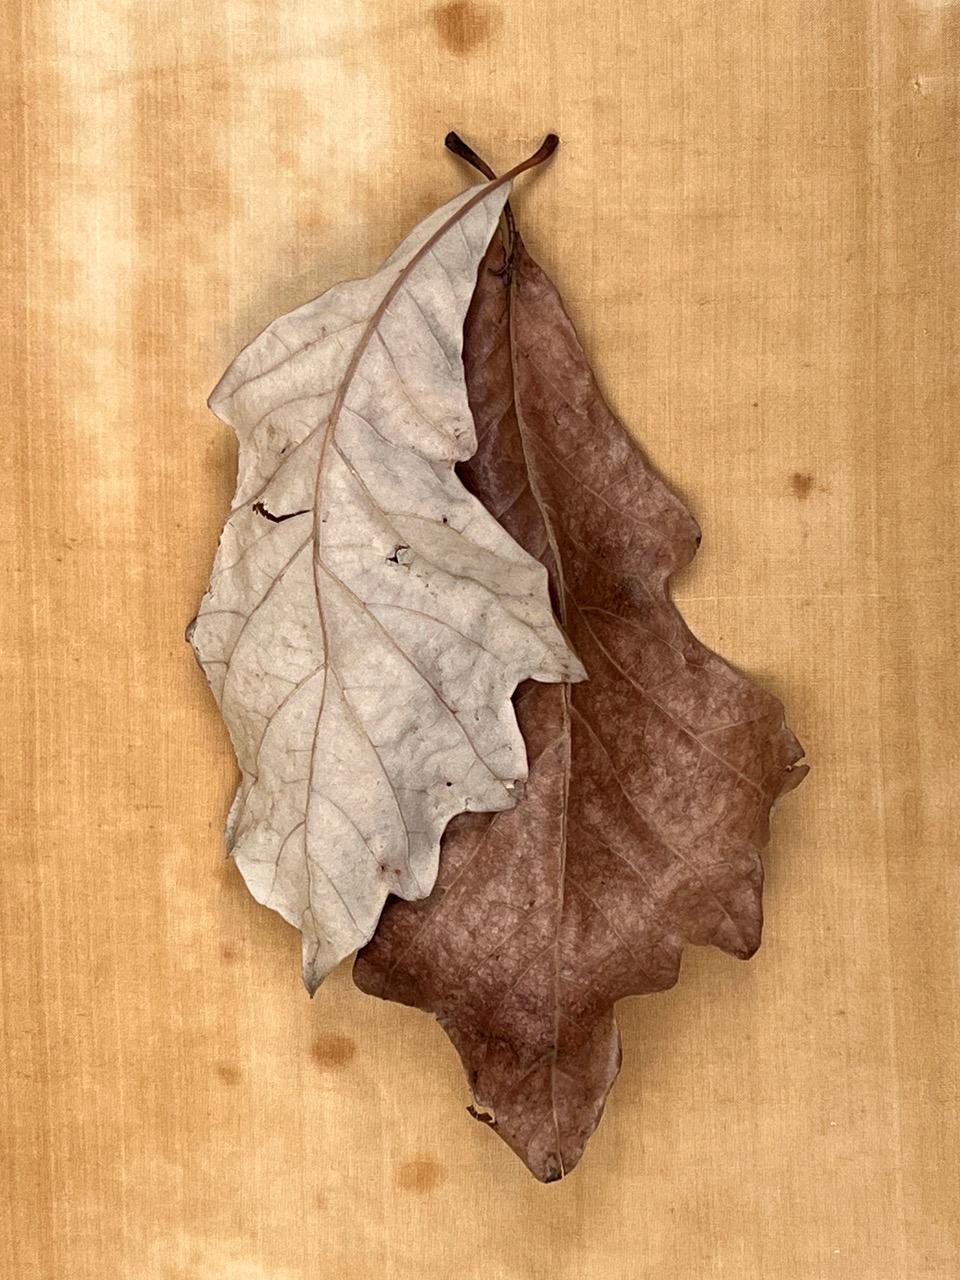 Paul Cava Color Photograph - Untitled #3557 from "Leaves" series: nature still-life leaf photograph w/ gold